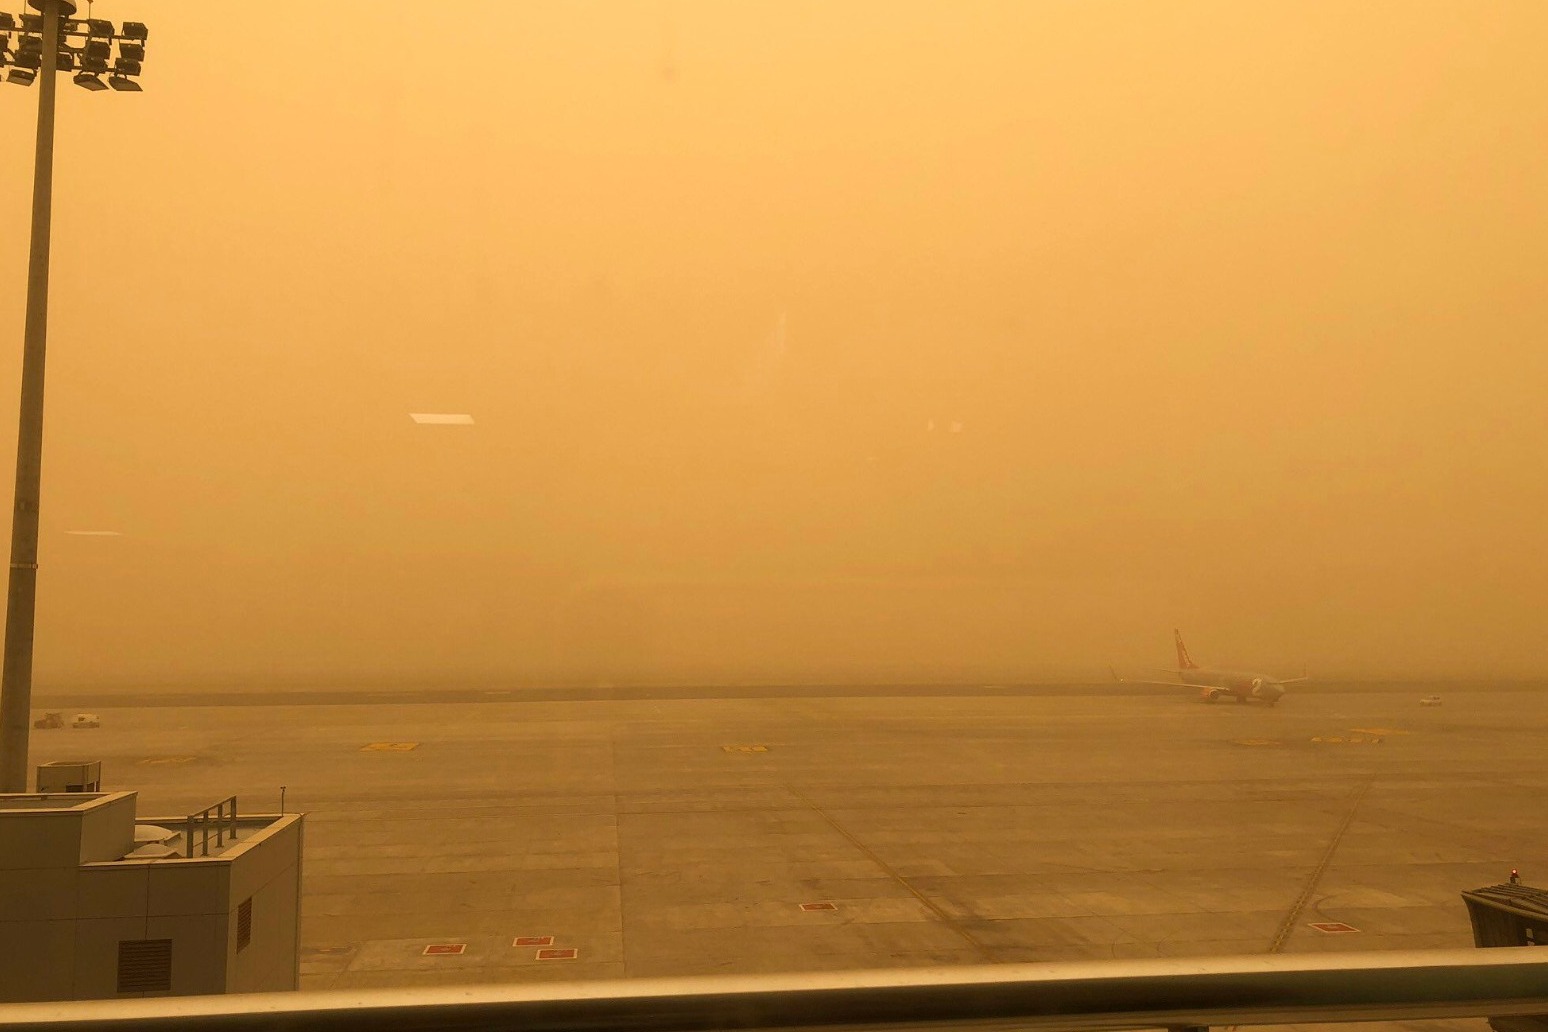 Britons returning from sandstorm-hit Tenerife diverted to Malaga without baggage 